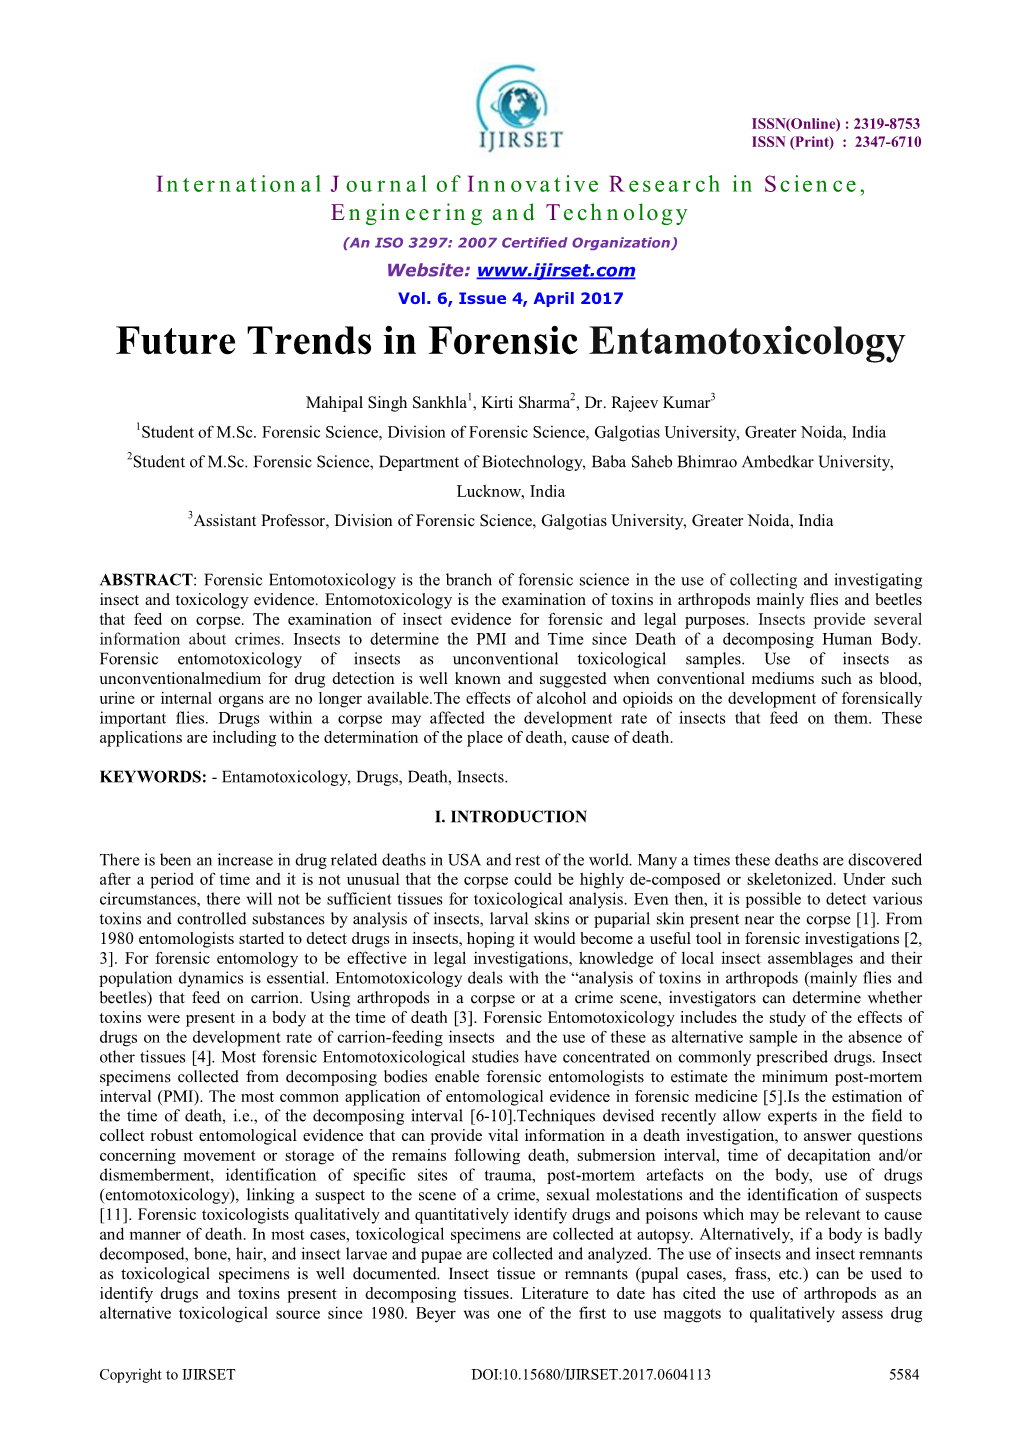 Future Trends in Forensic Entamotoxicology